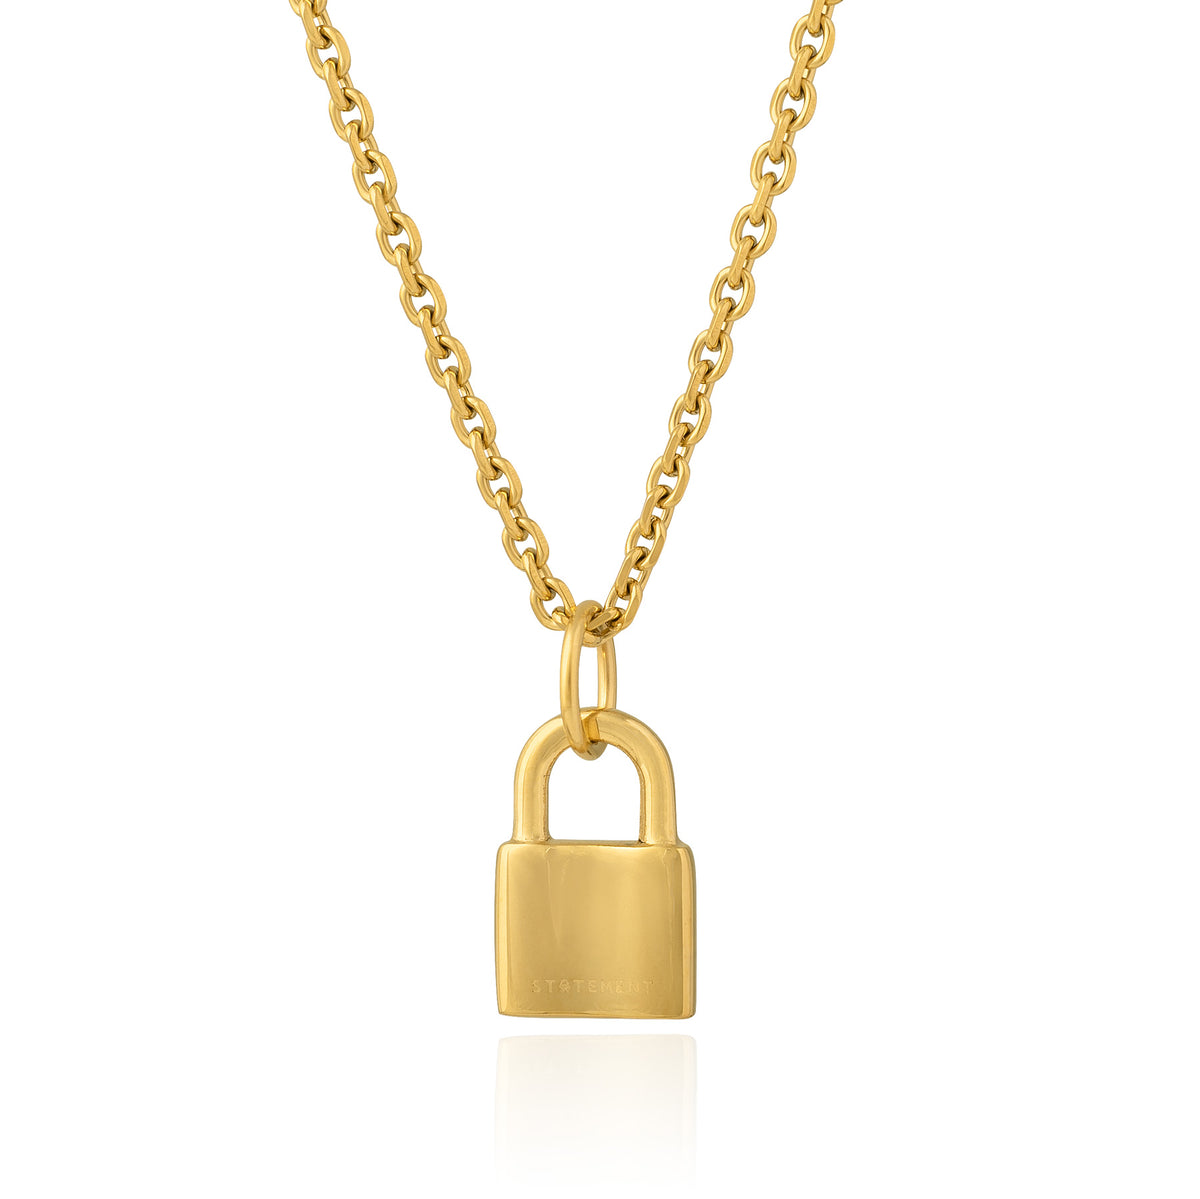 Gold padlock charm pendant on chain by statement